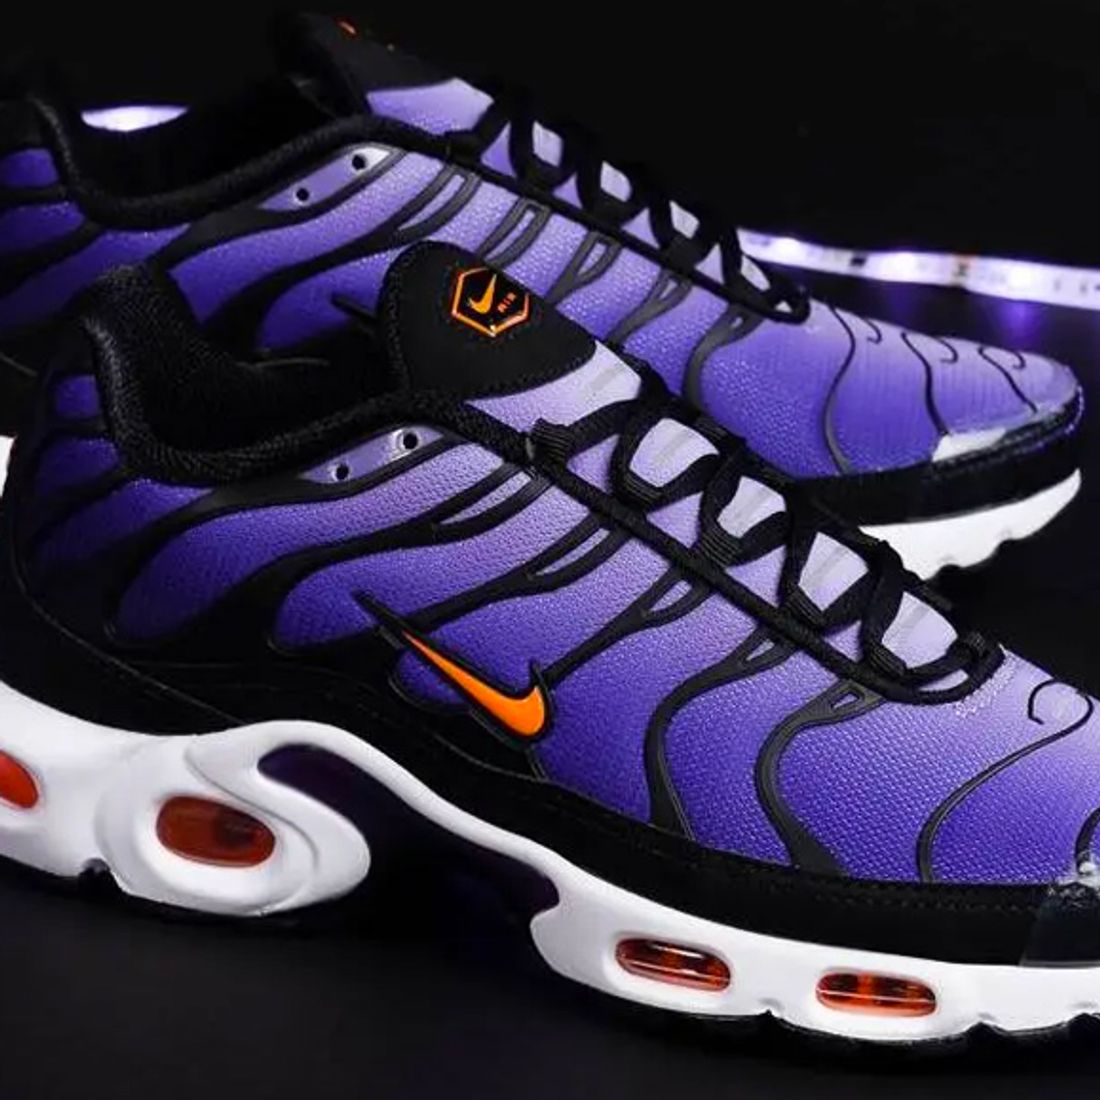 paracaídas repetir Pensionista The All-Time Greatest Nike Air Max Plus Releases: Part 2 - Sneaker Freaker